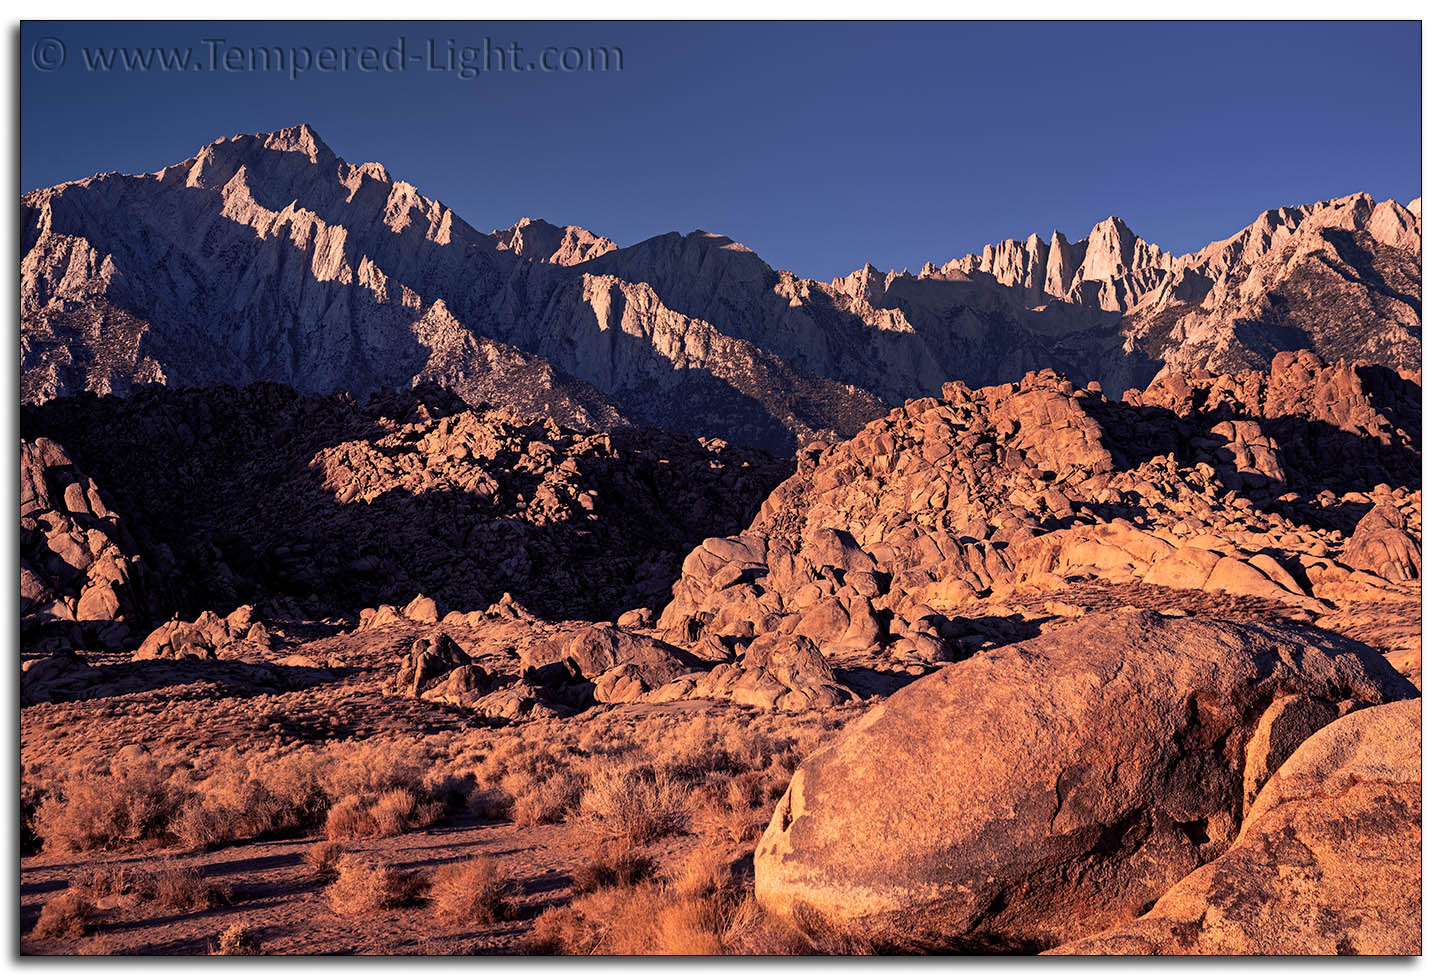 Lone Pine Peak and Mt. Whitney from Alabama Hills